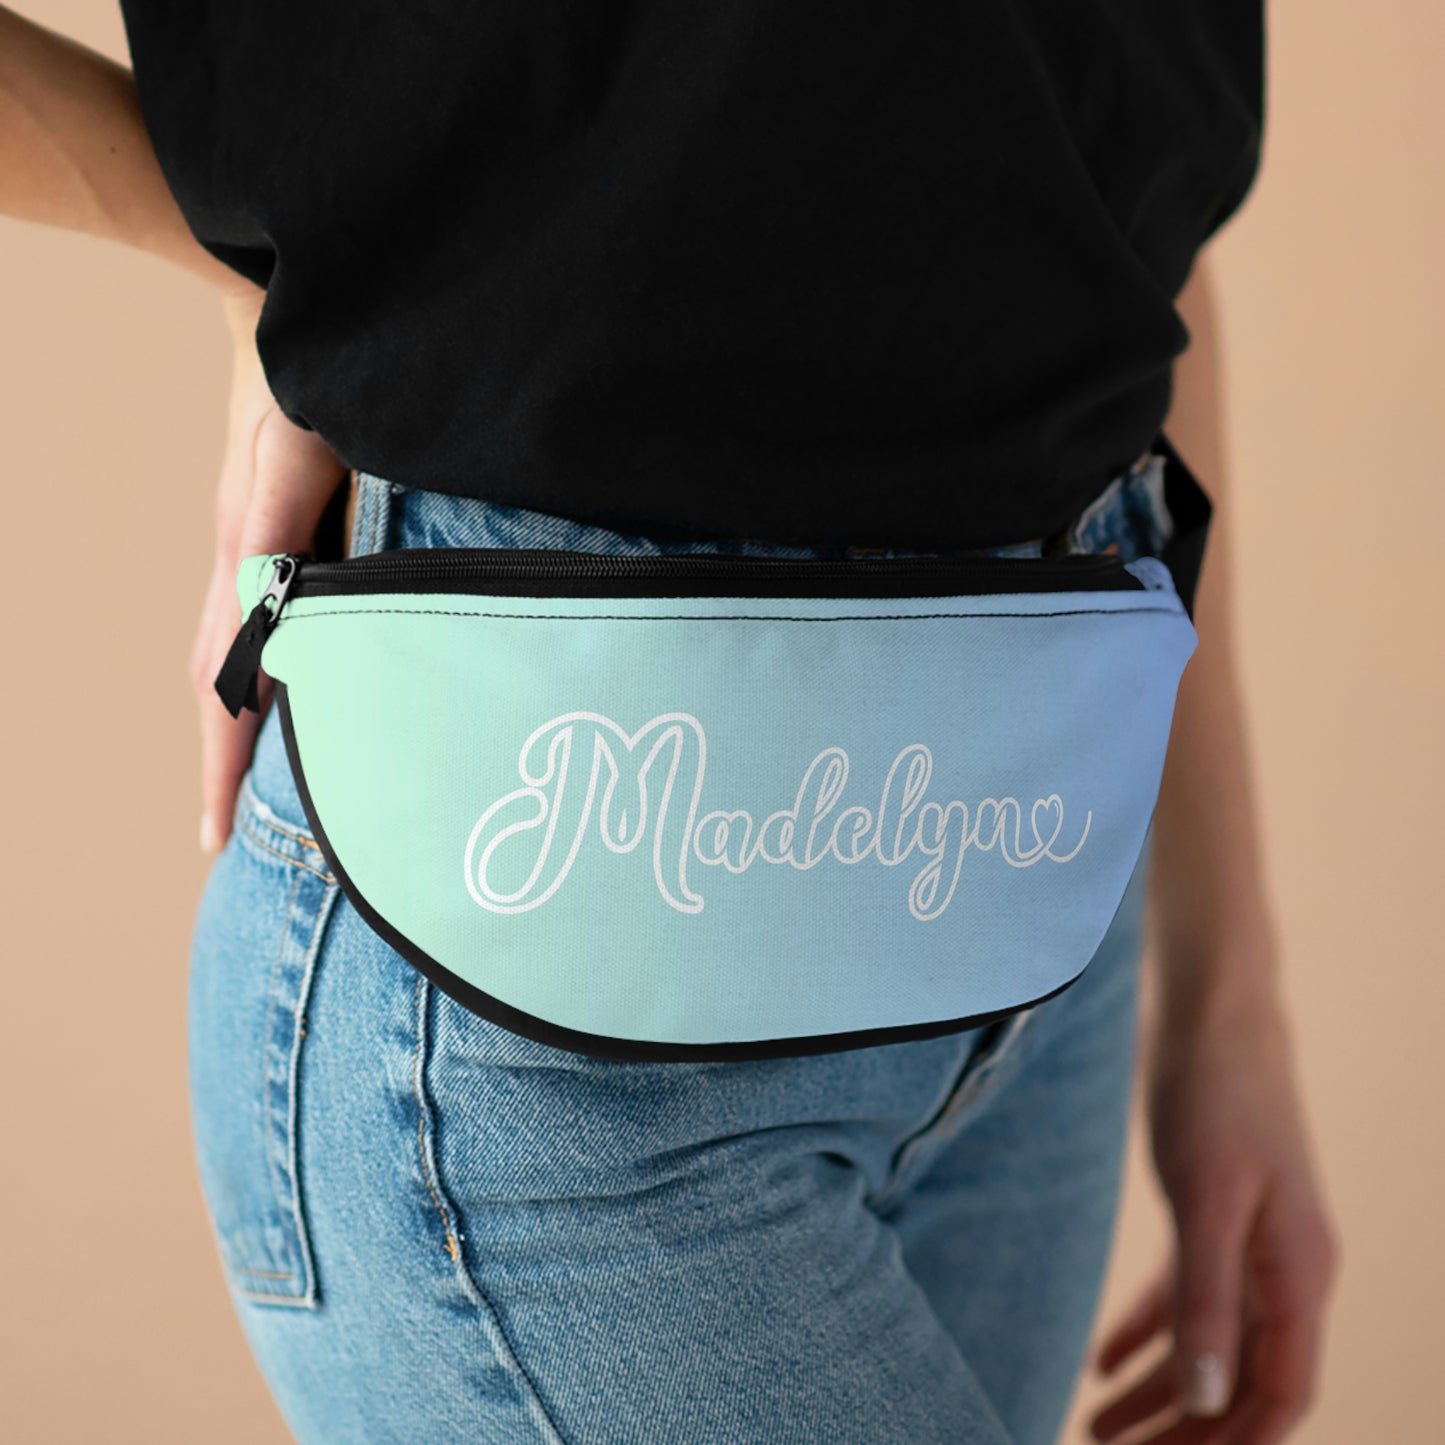 Cotton Candy Dreams Personalized Fanny Pack in Blue Pastels